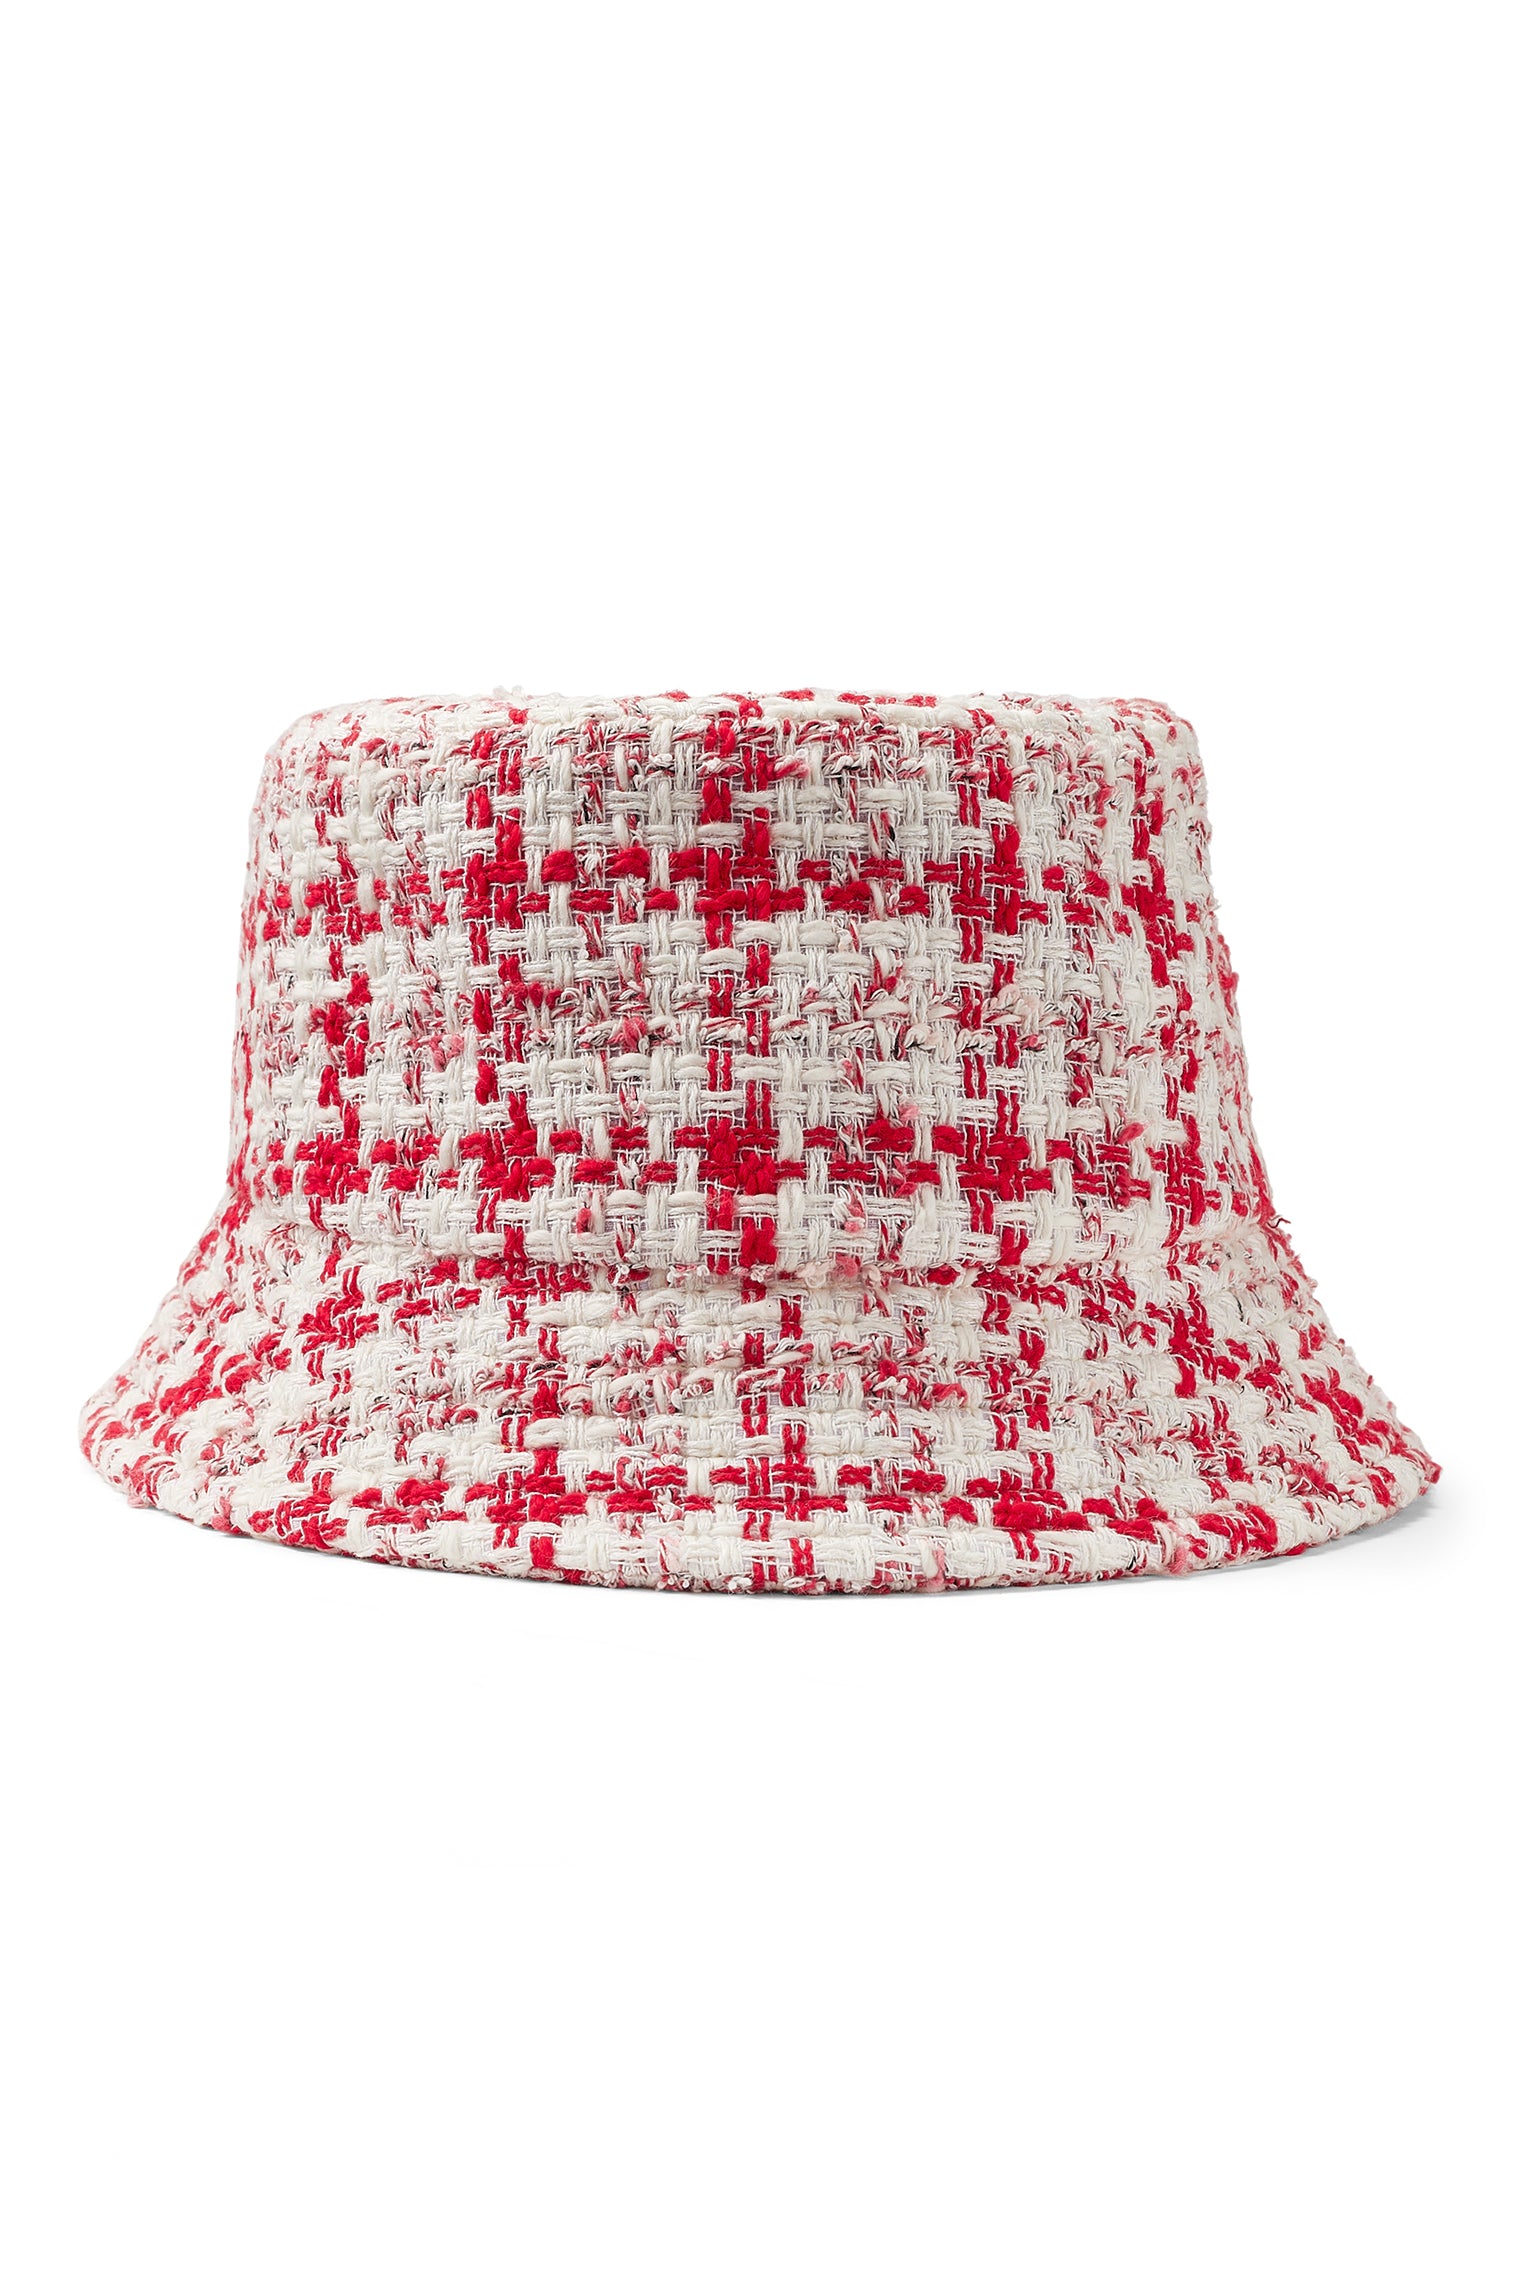 Rye Puppytooth Bucket Hat - Packable Hats for Travel - Lock & Co. Hatters London UK